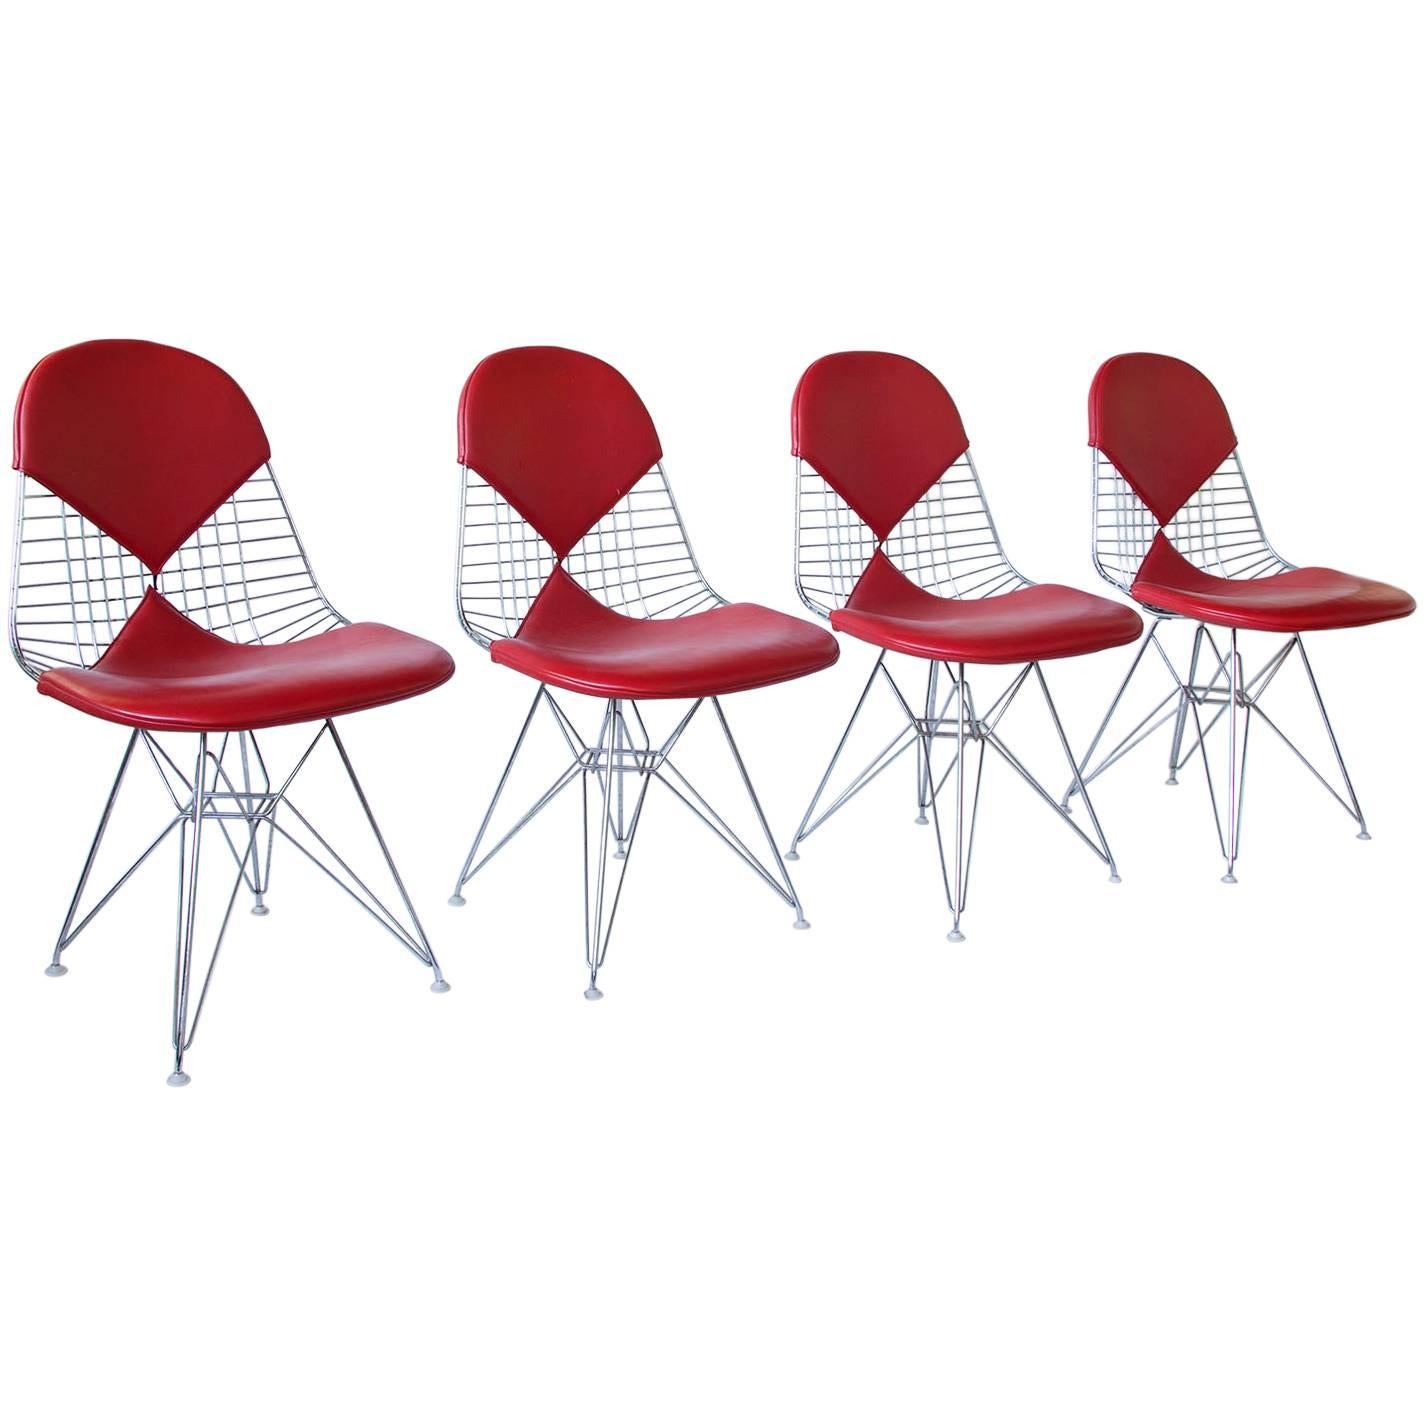 Are Charles Eames chairs comfortable?